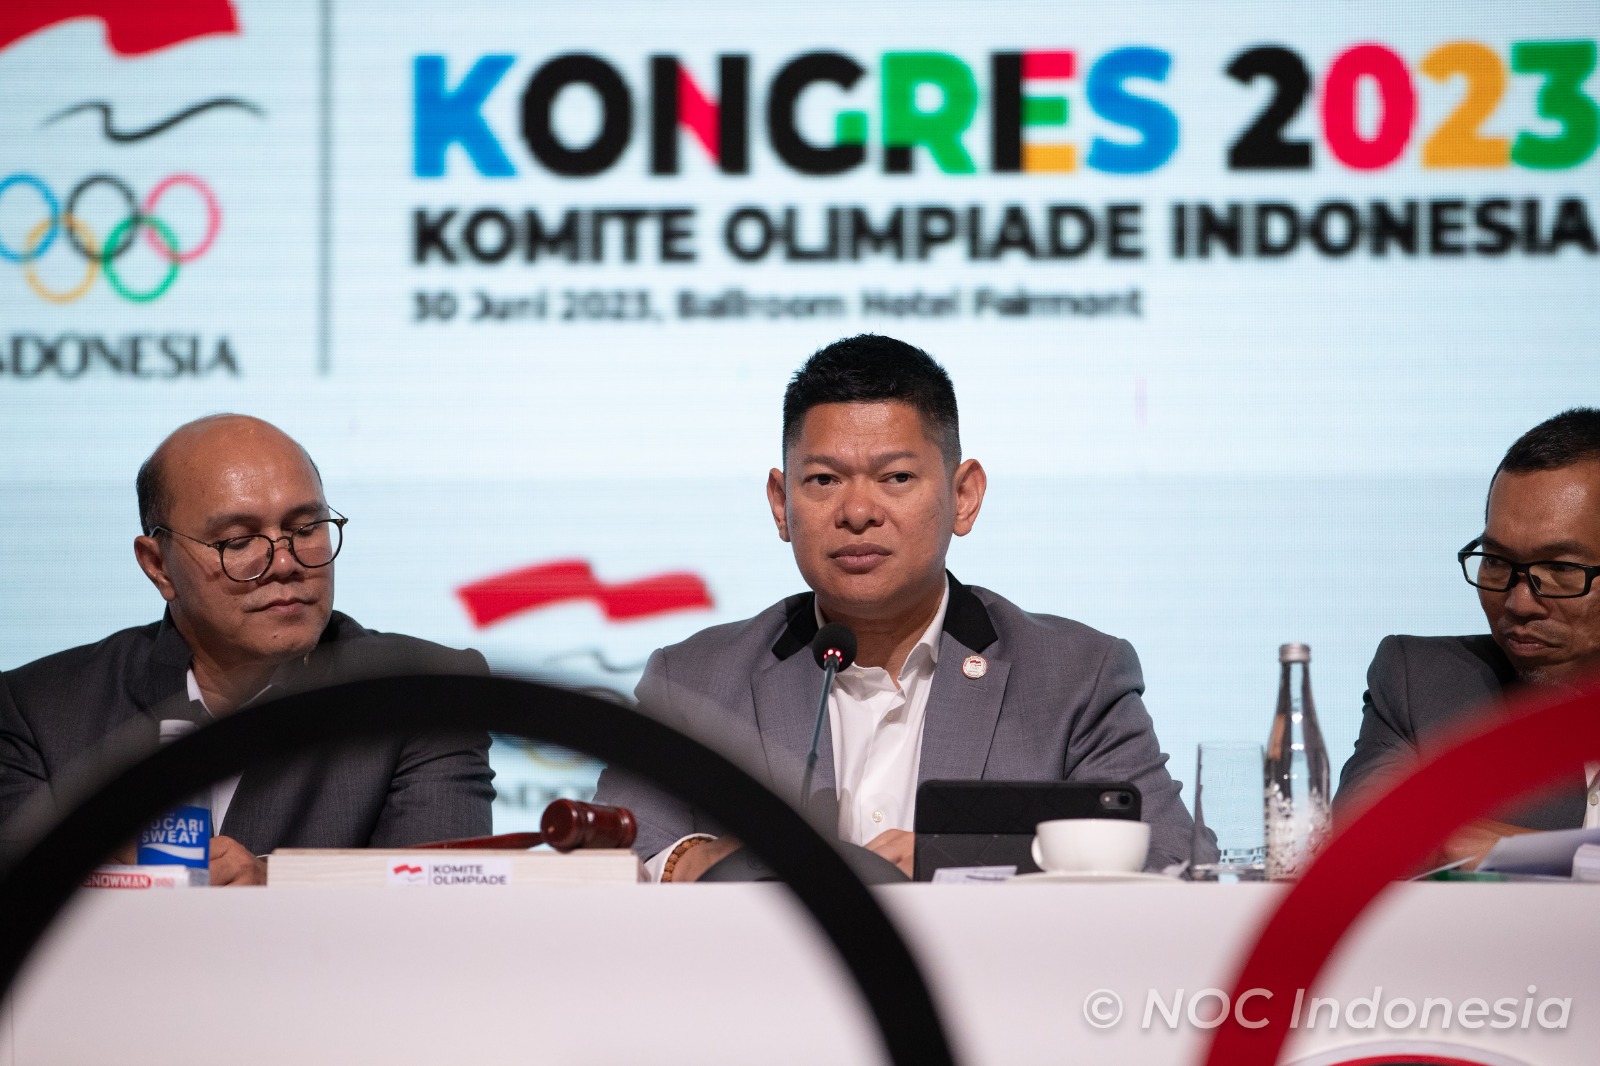 Indonesia Targets Increased Representation at 2024 Paris Olympics - Indonesia Olympic Commitee